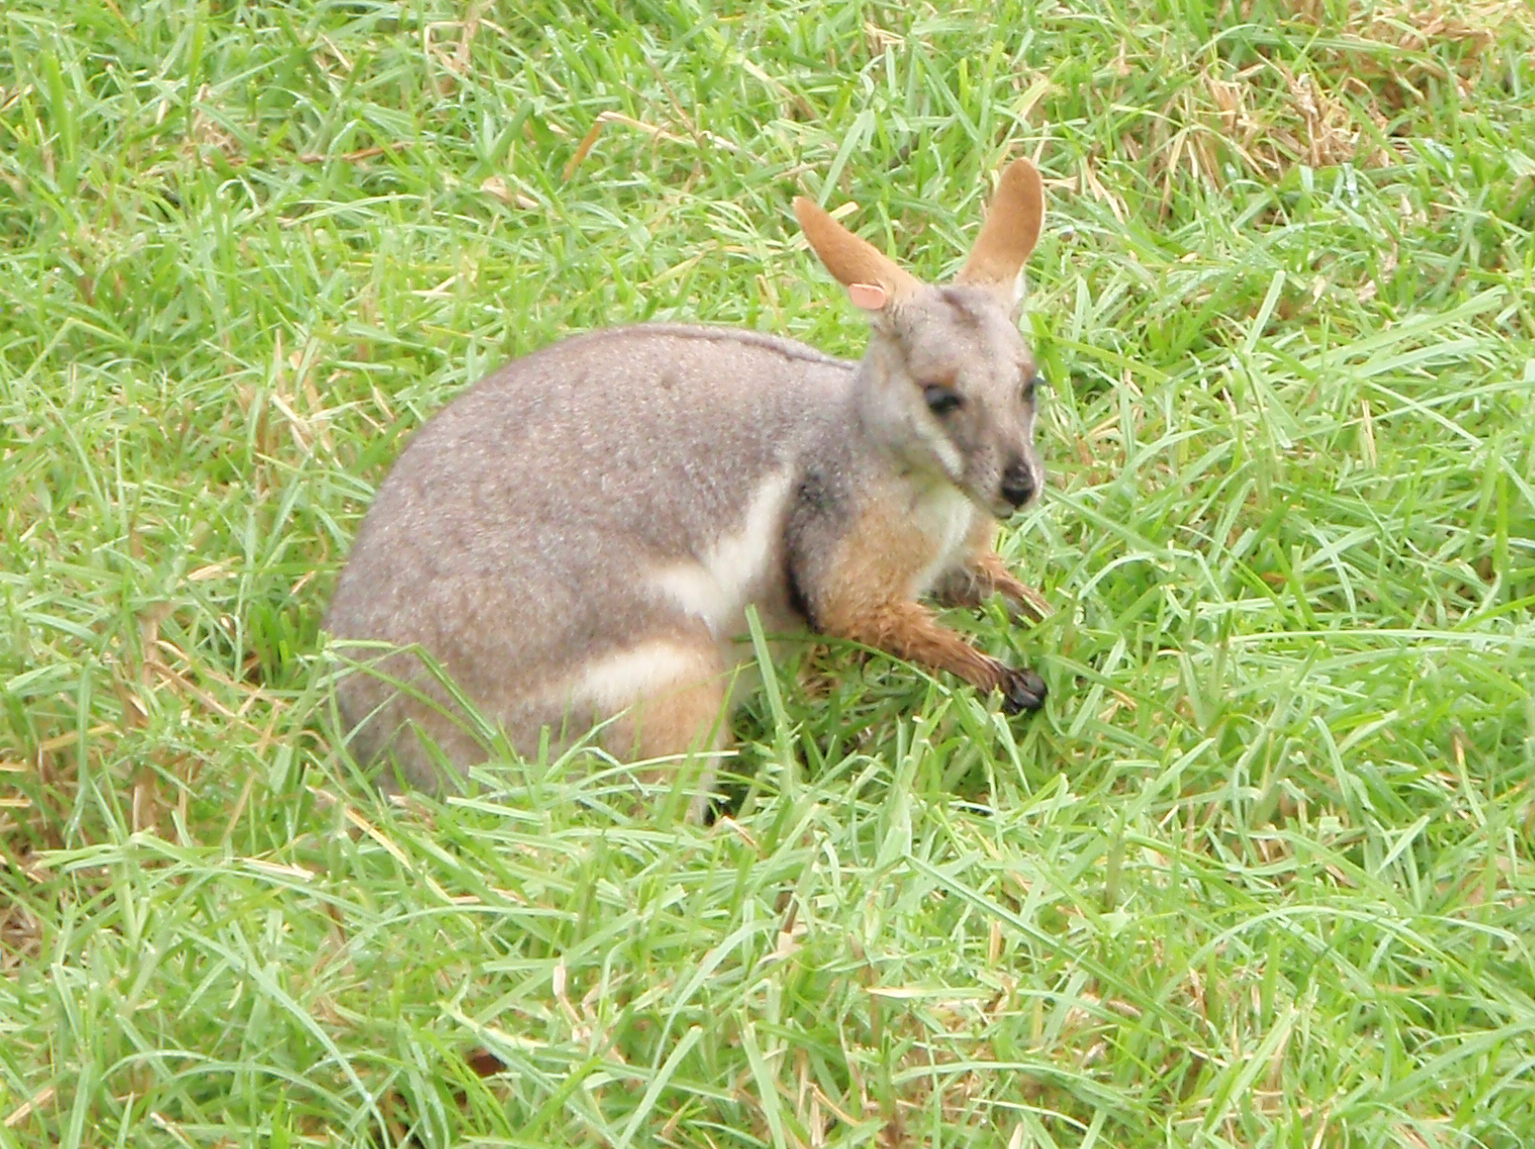 Yellow-tailed wallaby at the Adelaide Zoo